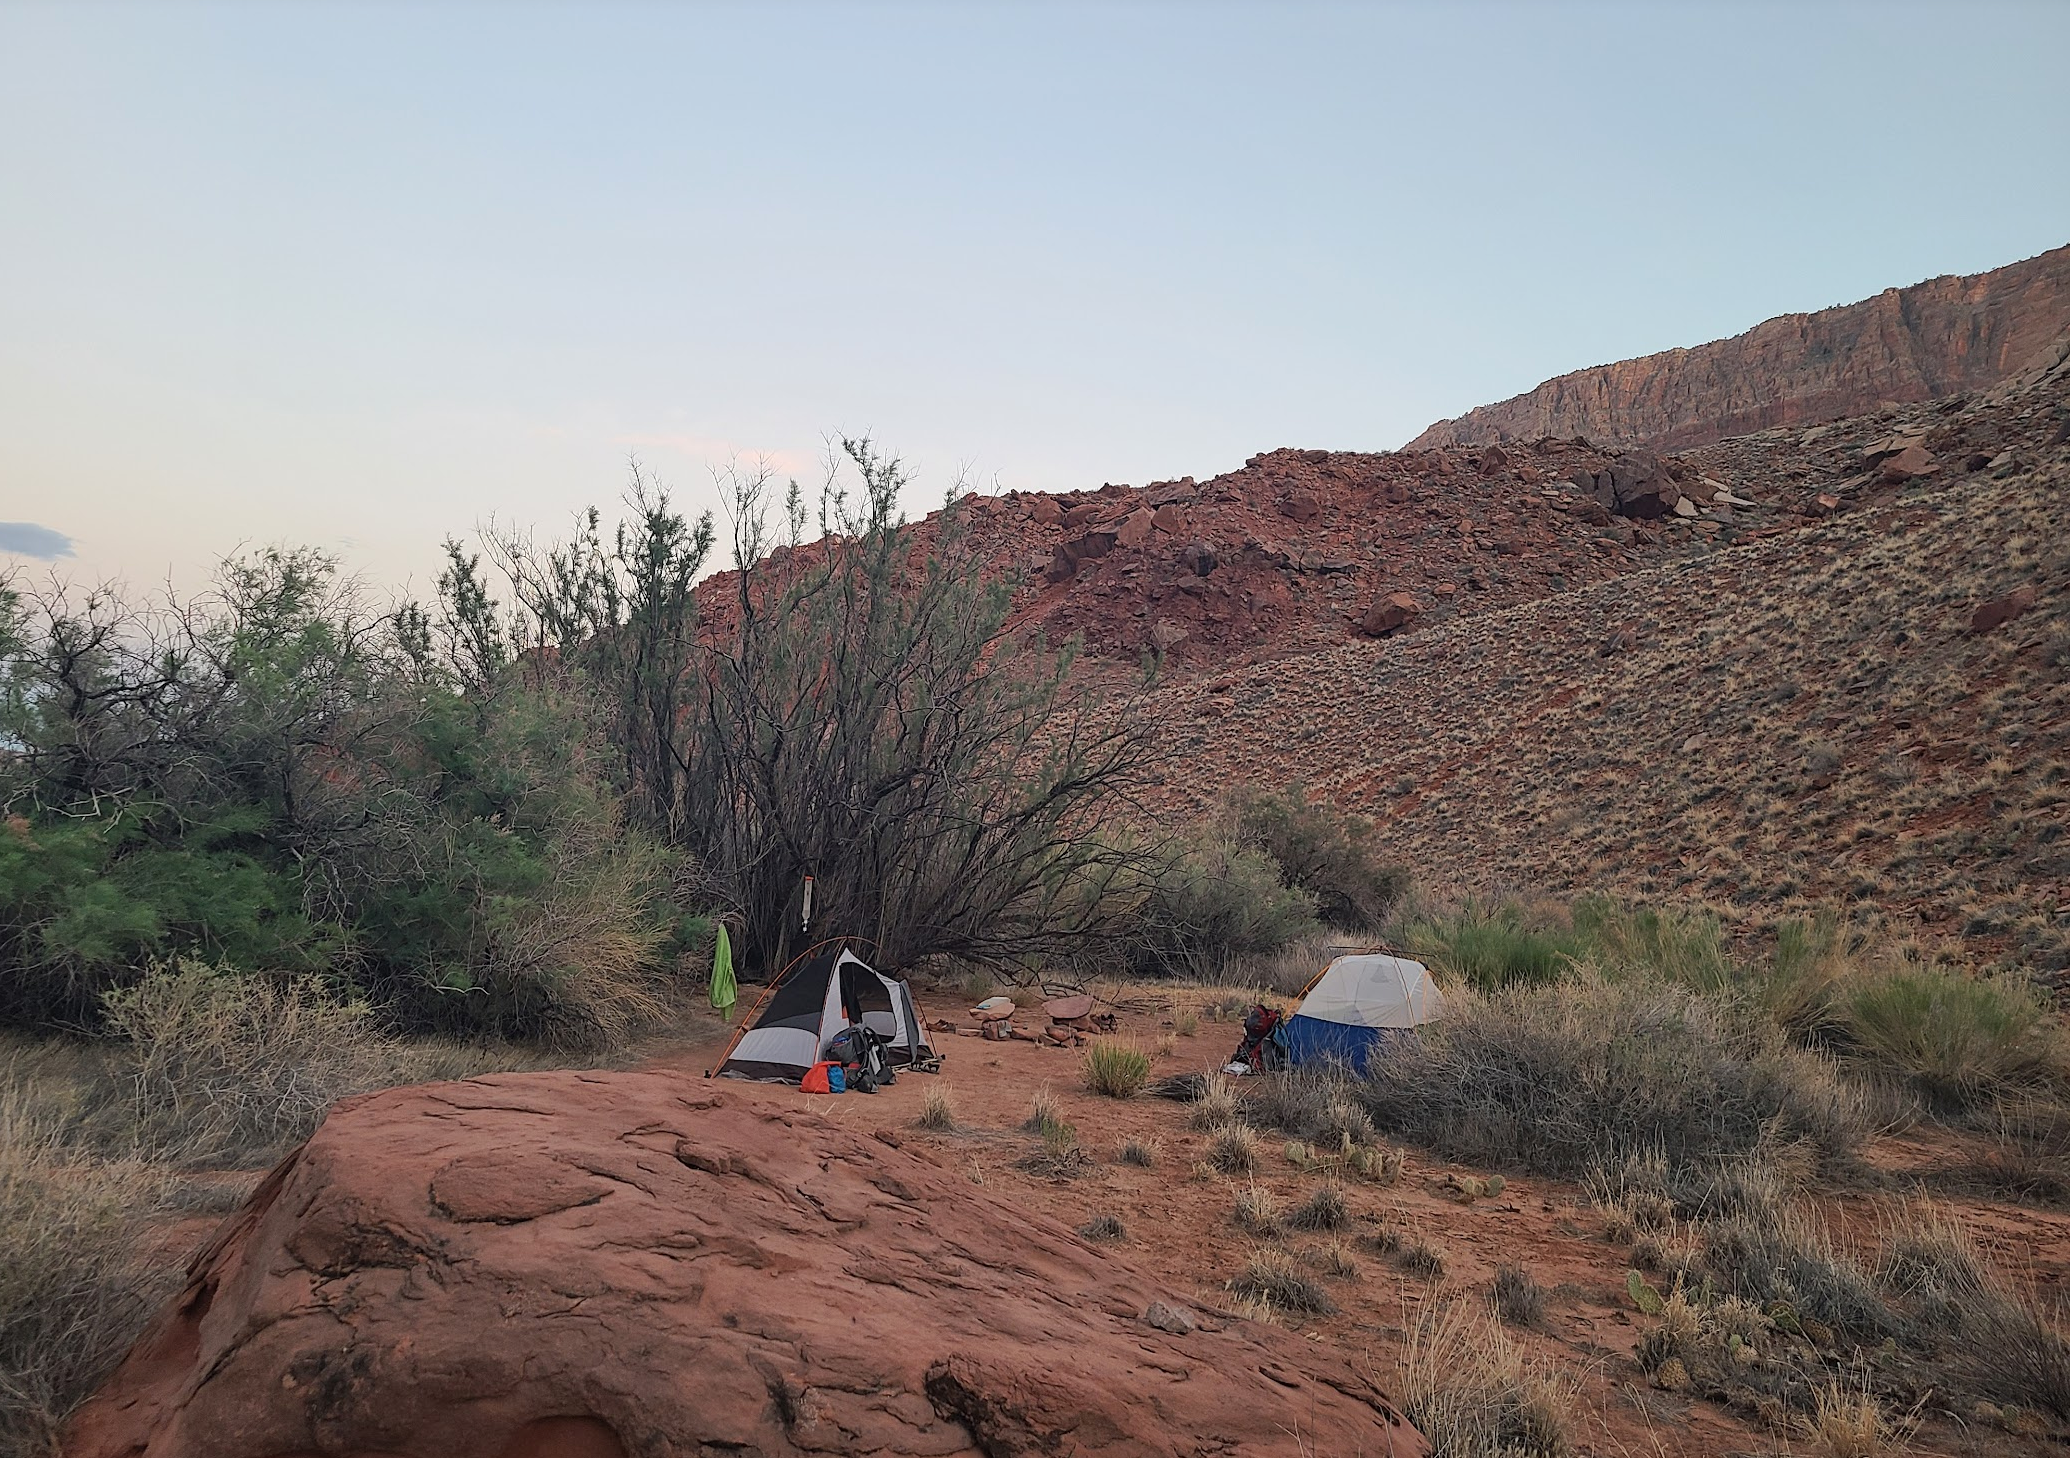 Camper submitted image from Paria Canyon Wilderness - Final Designated Campsite Before Lee's Ferry - 1